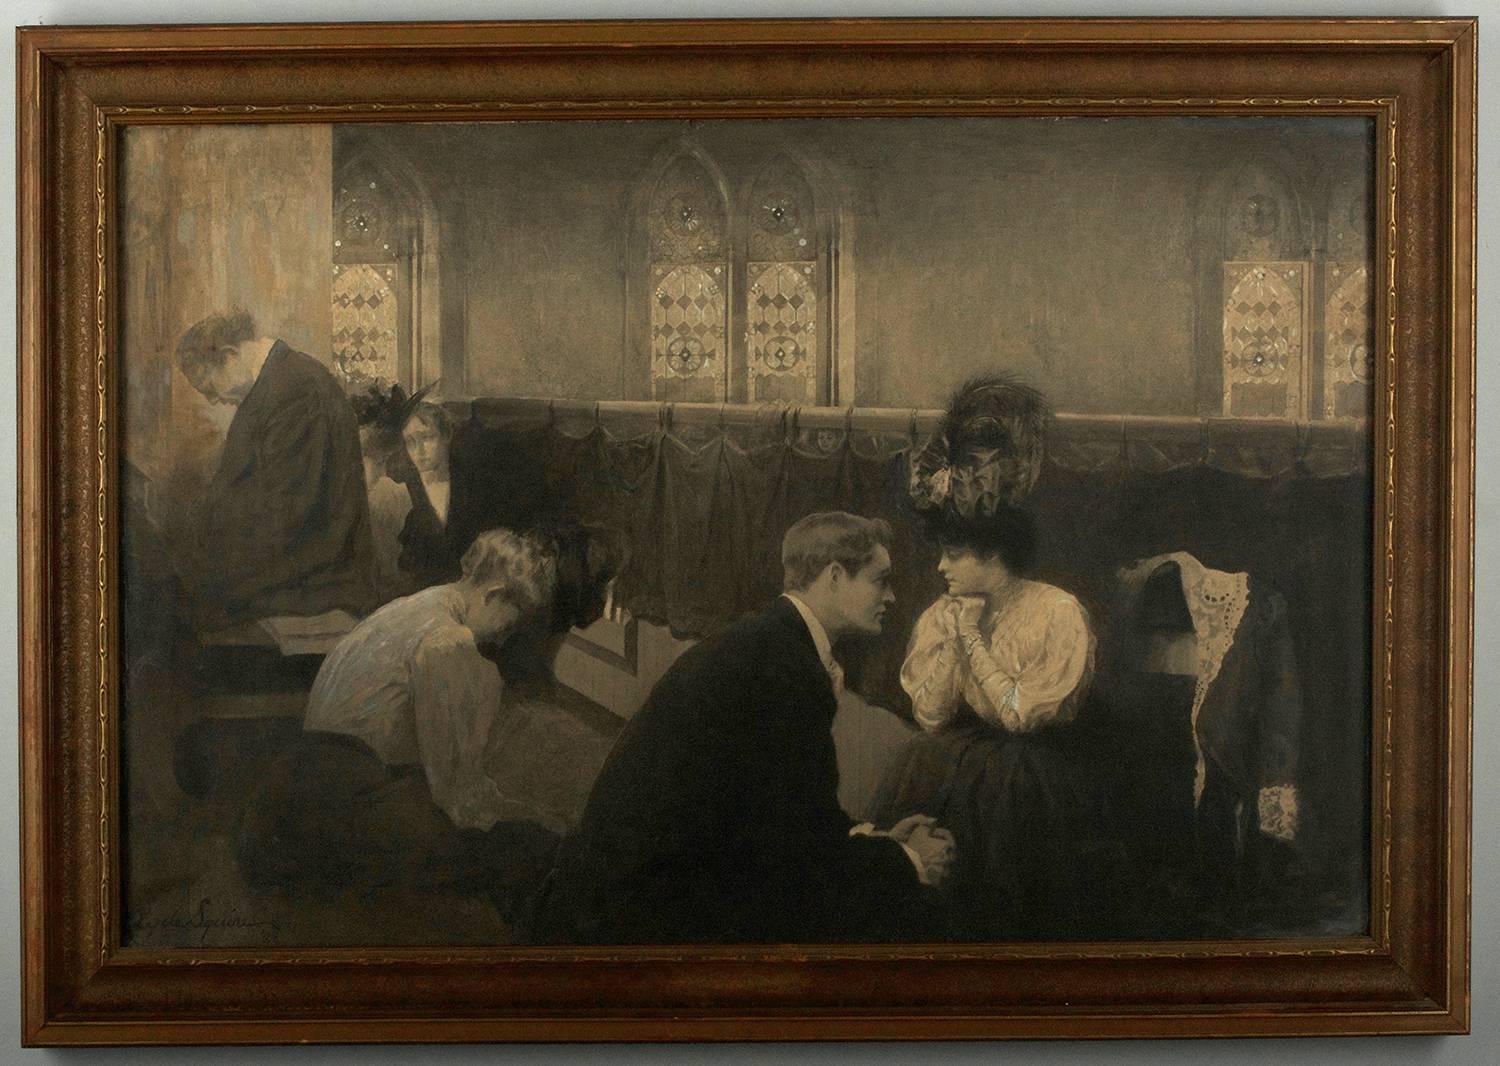 Victorian Mourning Interior Scene - Art by C. Clyde Squires